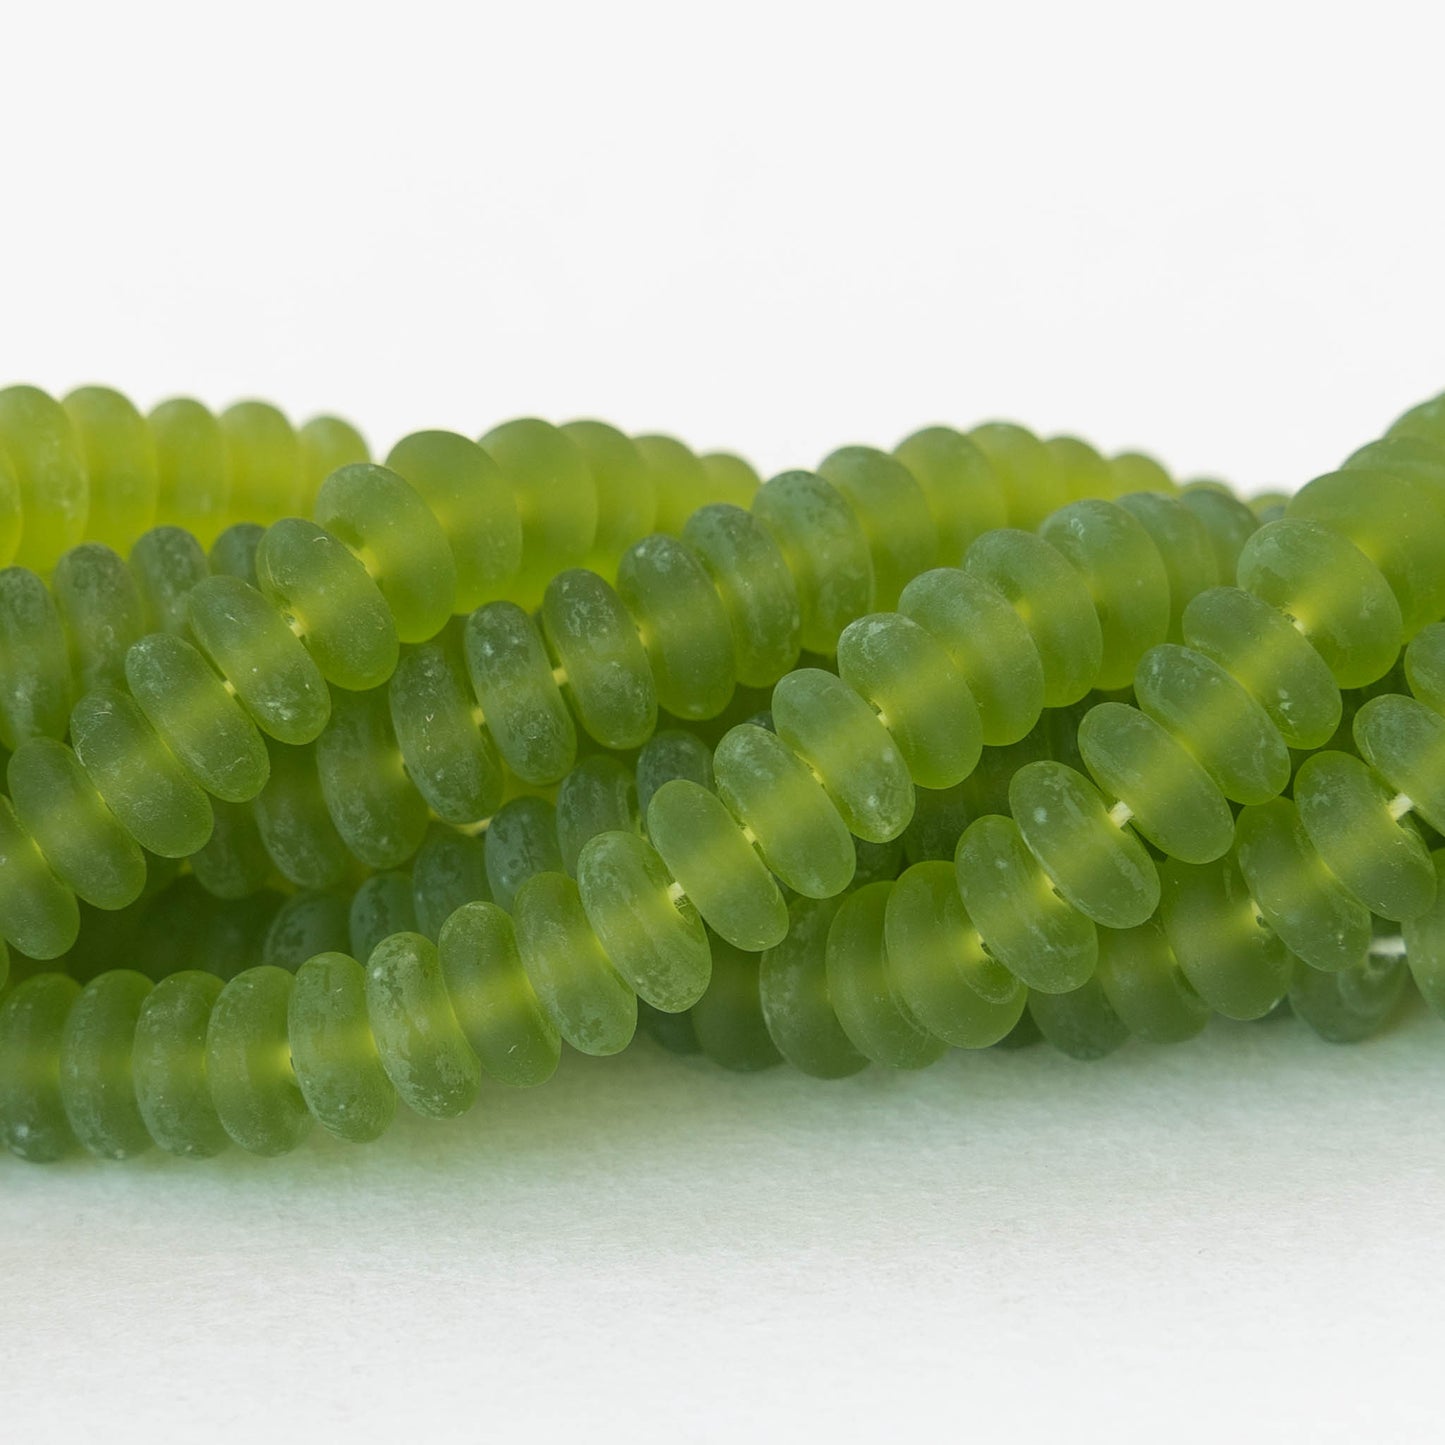 6mm Rondelle Beads - Lime Green Matte - 100 Beads